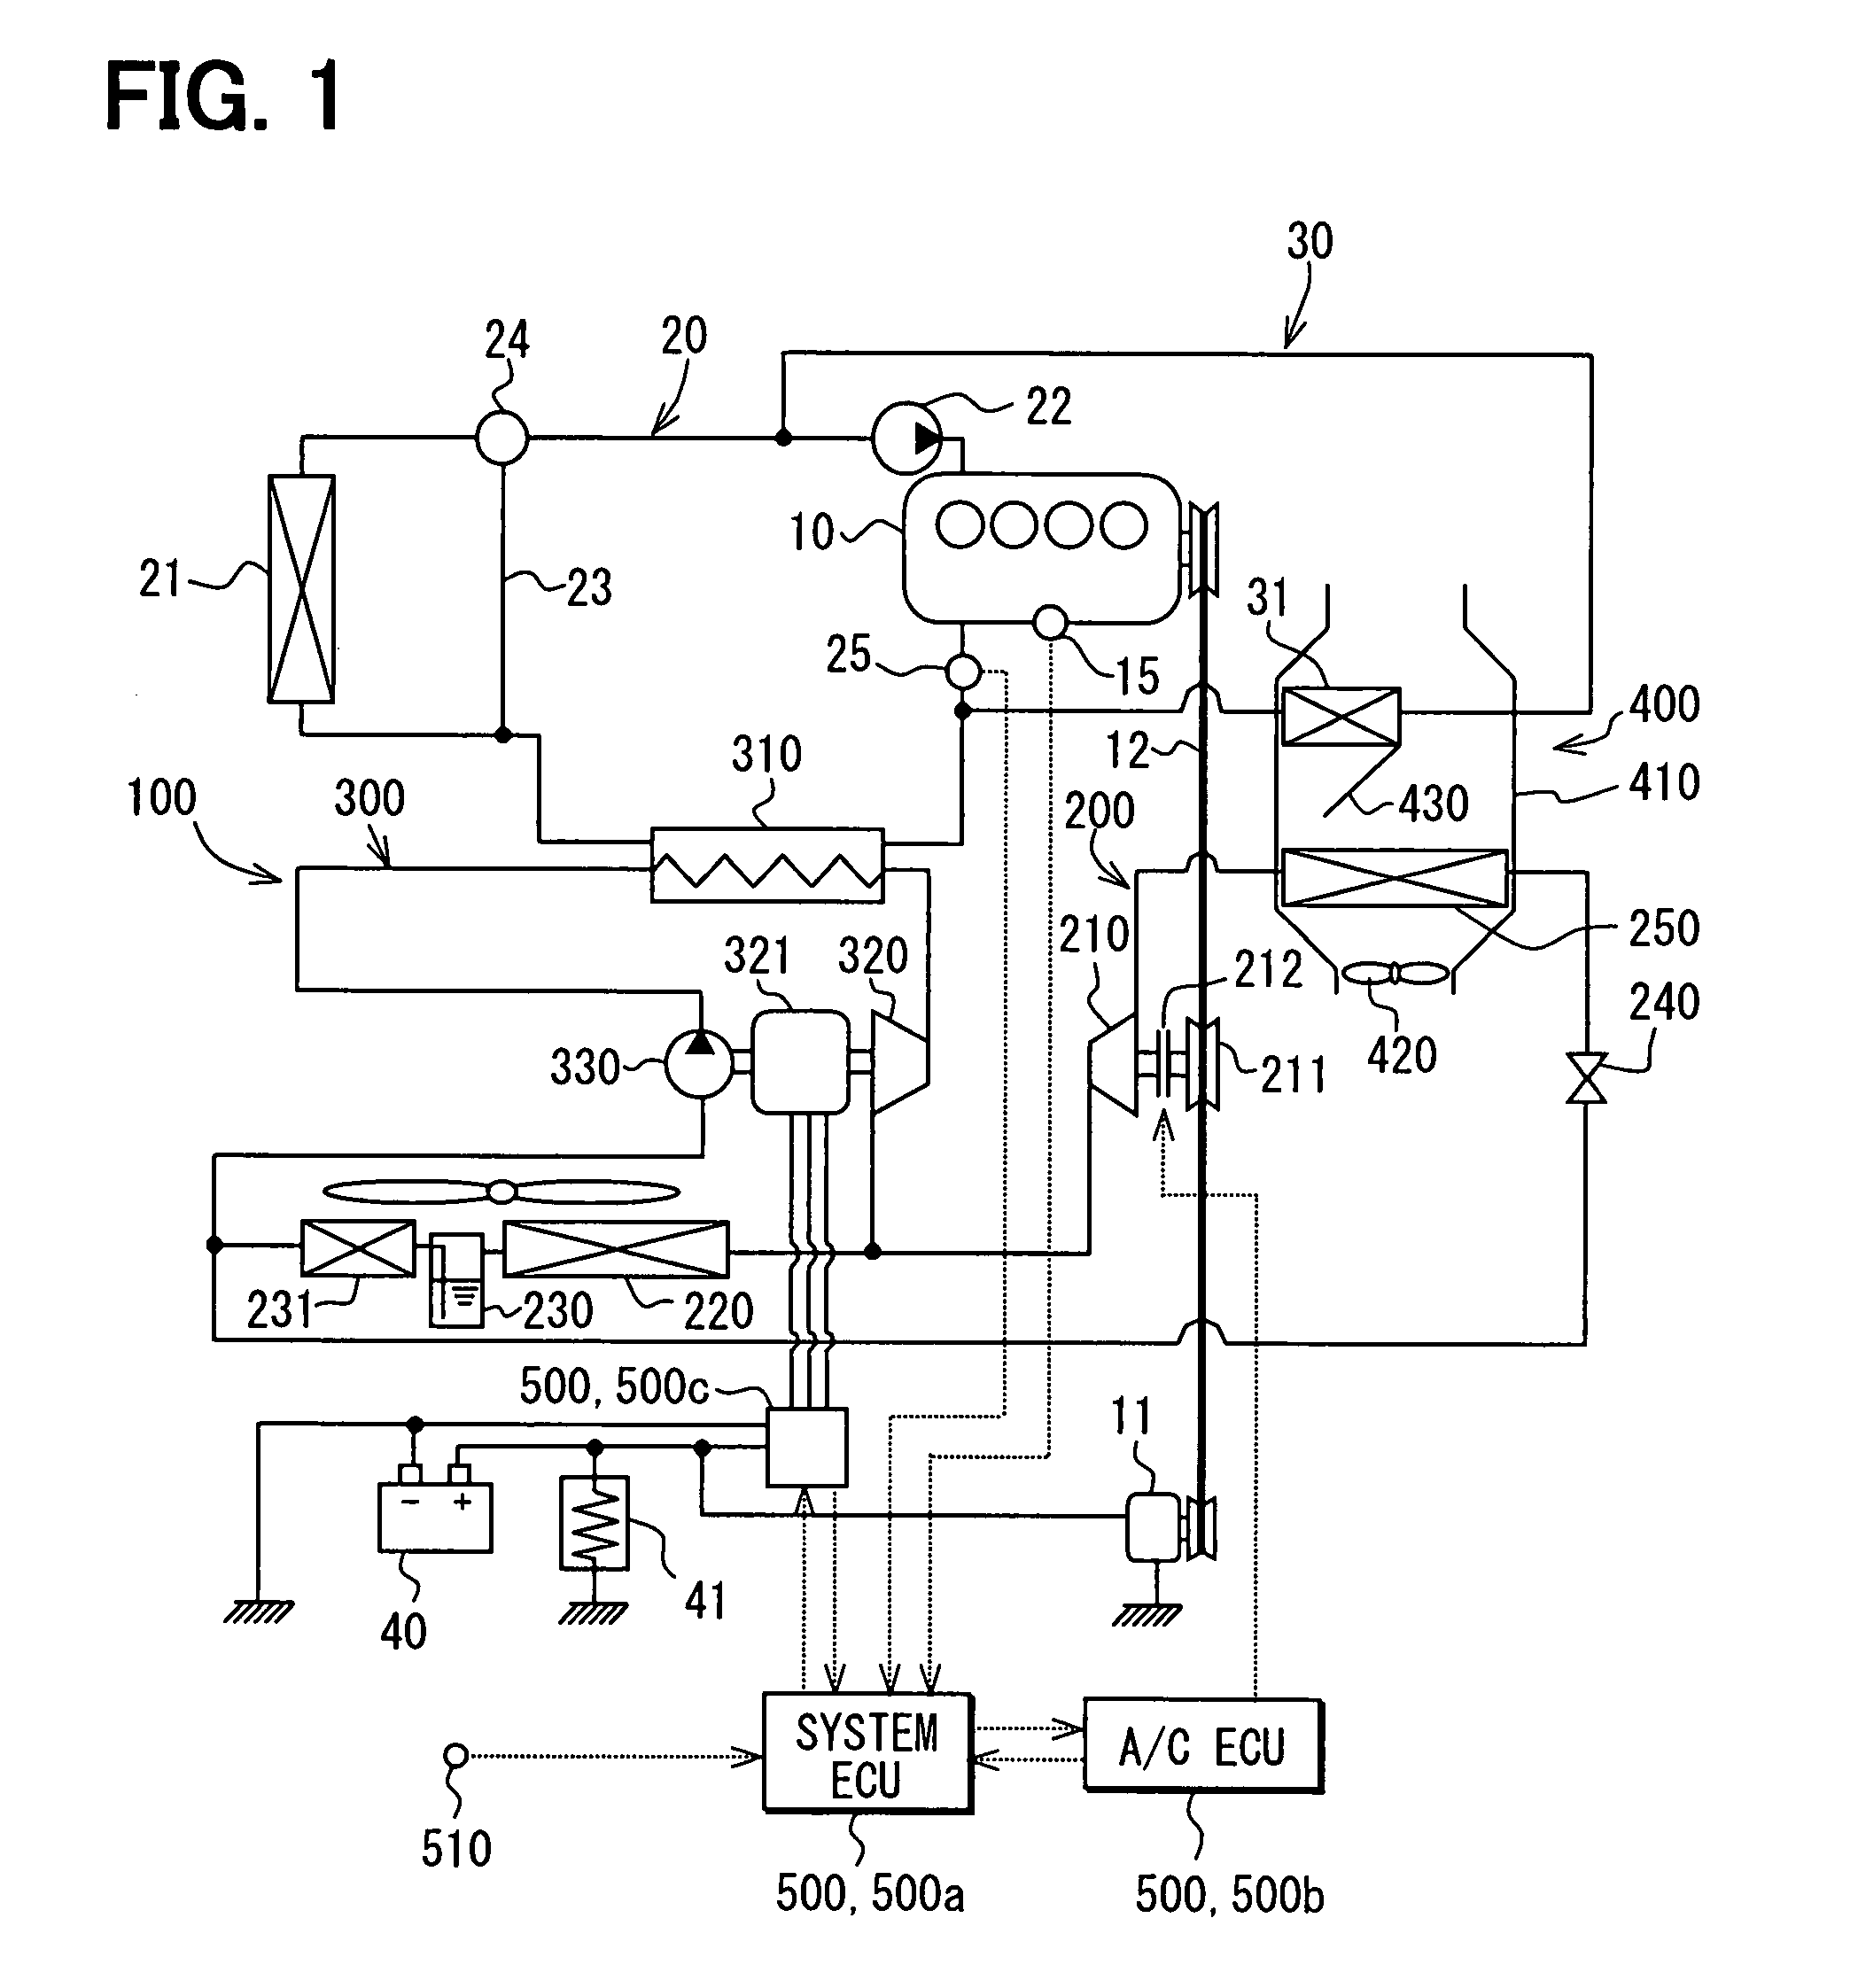 Refrigeration system including refrigeration cycle and rankine cycle